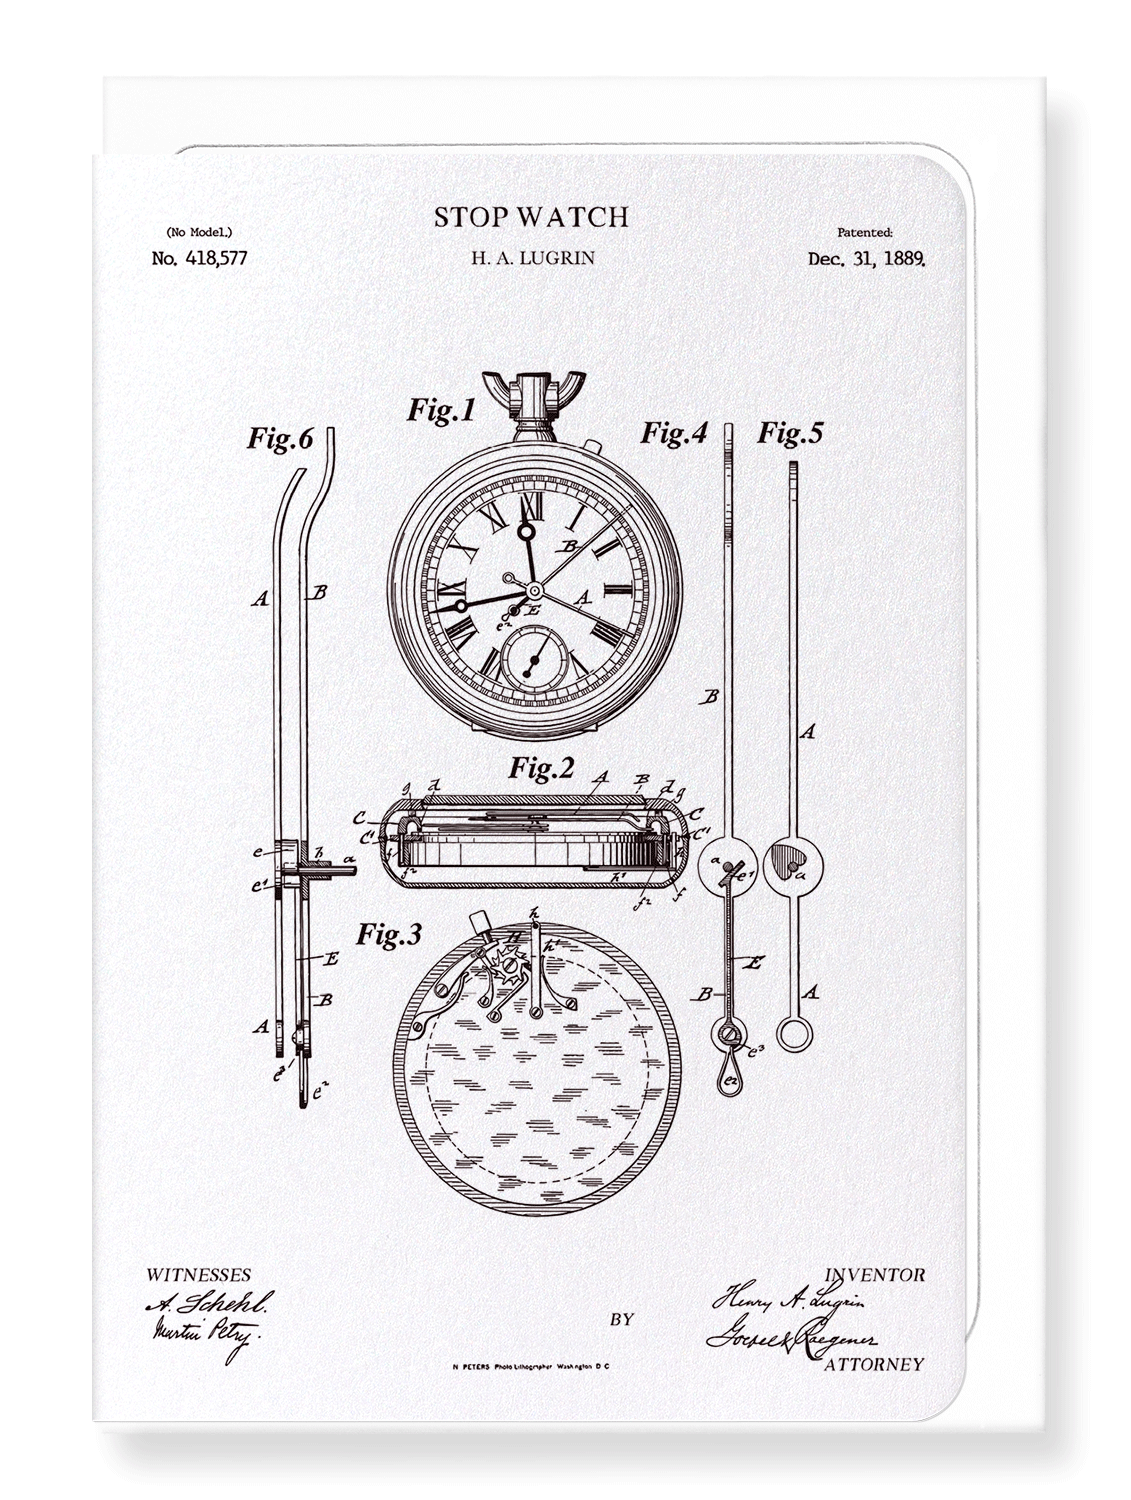 Ezen Designs - Patent of stopwatch (1889) - Greeting Card - Front